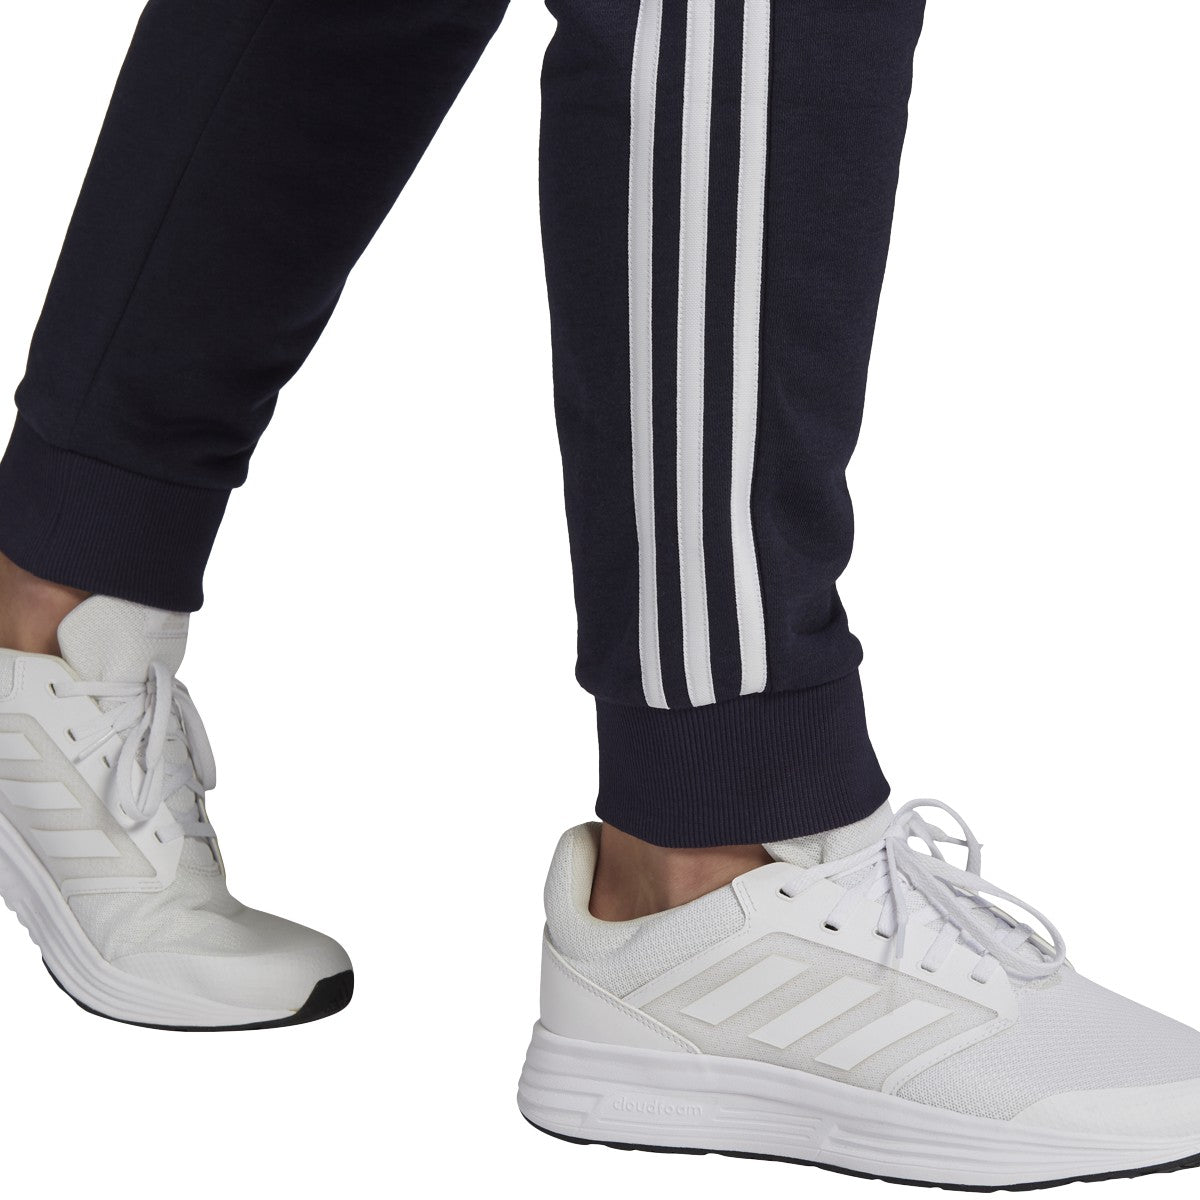 adidas Essentials 3 Tapered Zone – Stripes Pants Cuff LEGEND GK88 - INK/WHITE Soccer